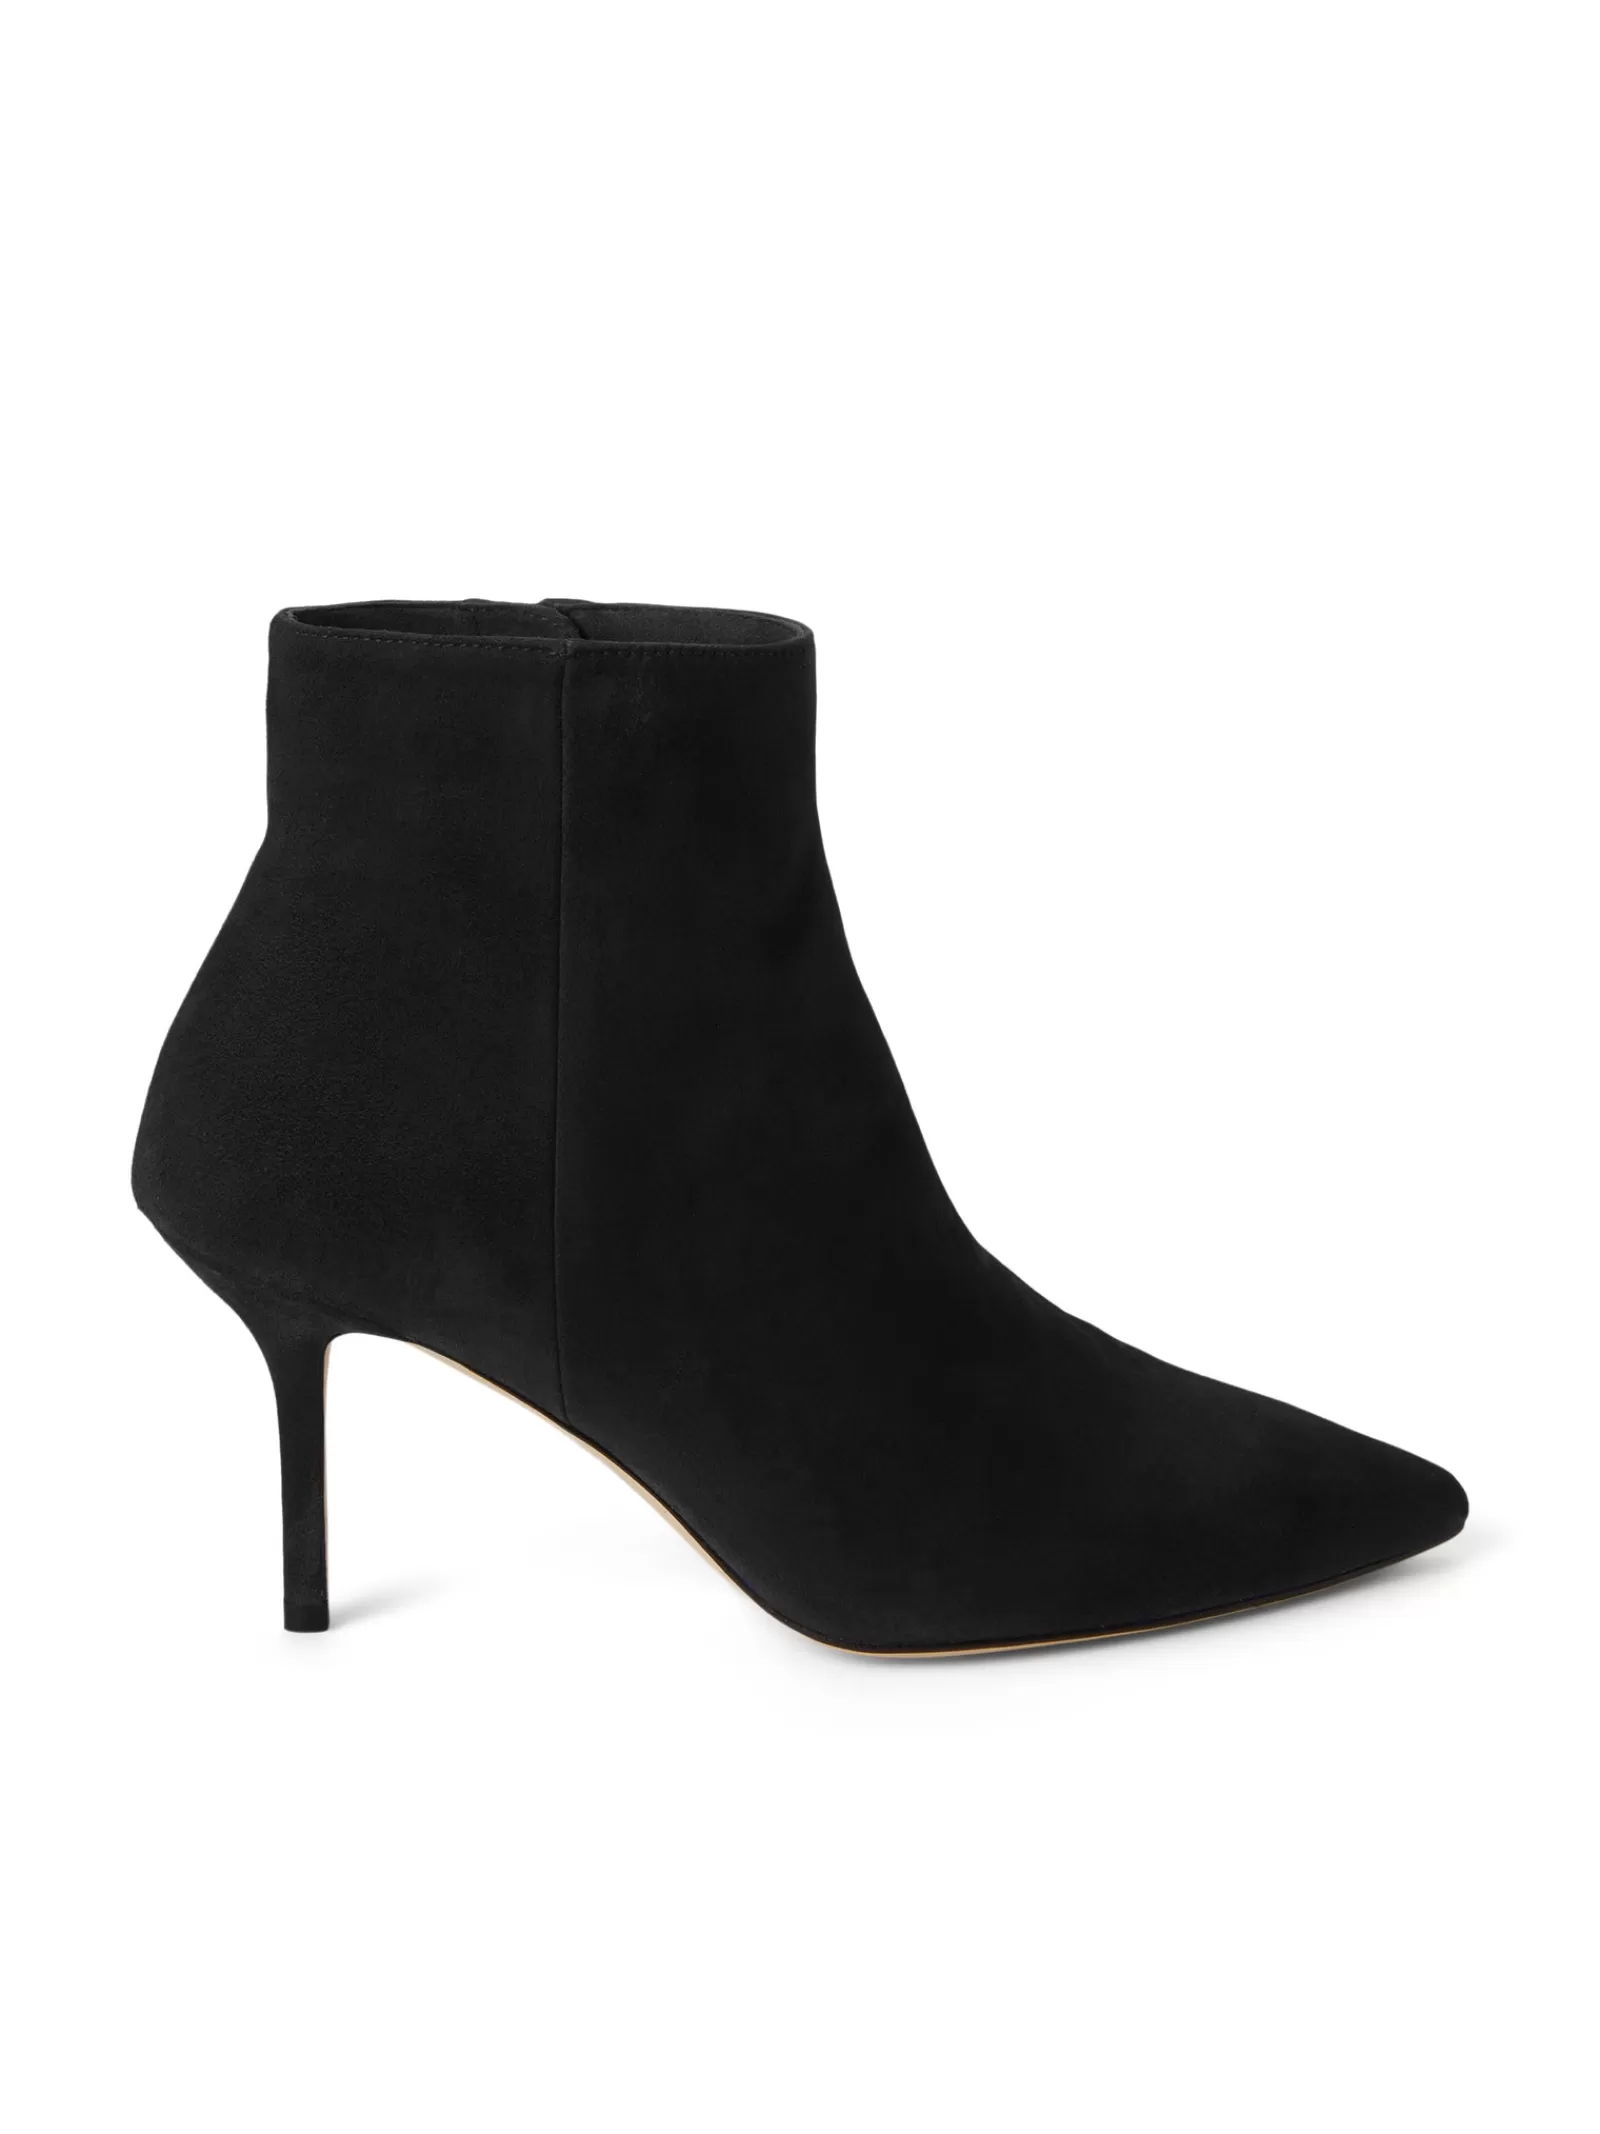 L'AGENCE Aimee Bootie< Boots & Booties | All Things Black